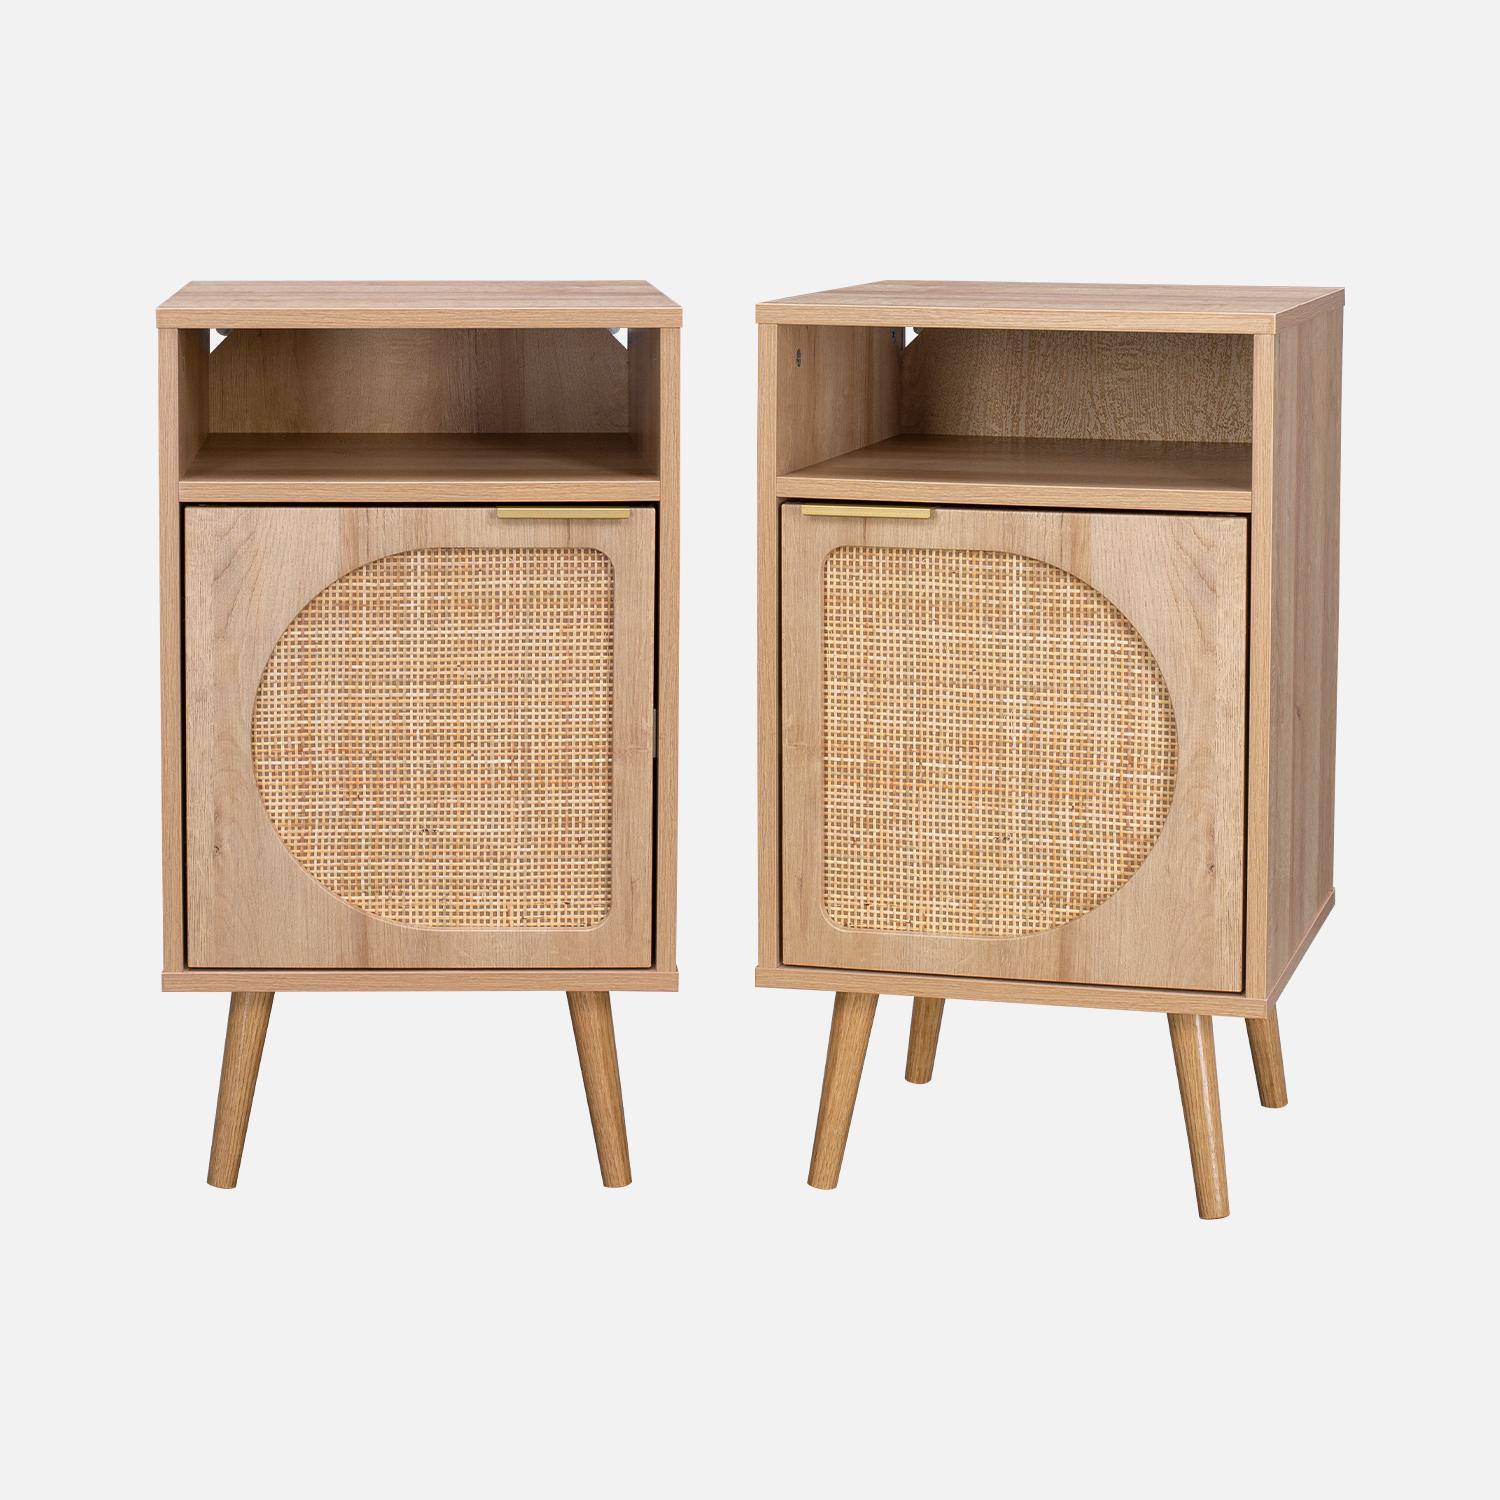 Pair of wood and rounded cane rattan bedside tables, 40x39x65.8cm, Eva, 1 cupboard, 1 storage space each Photo4